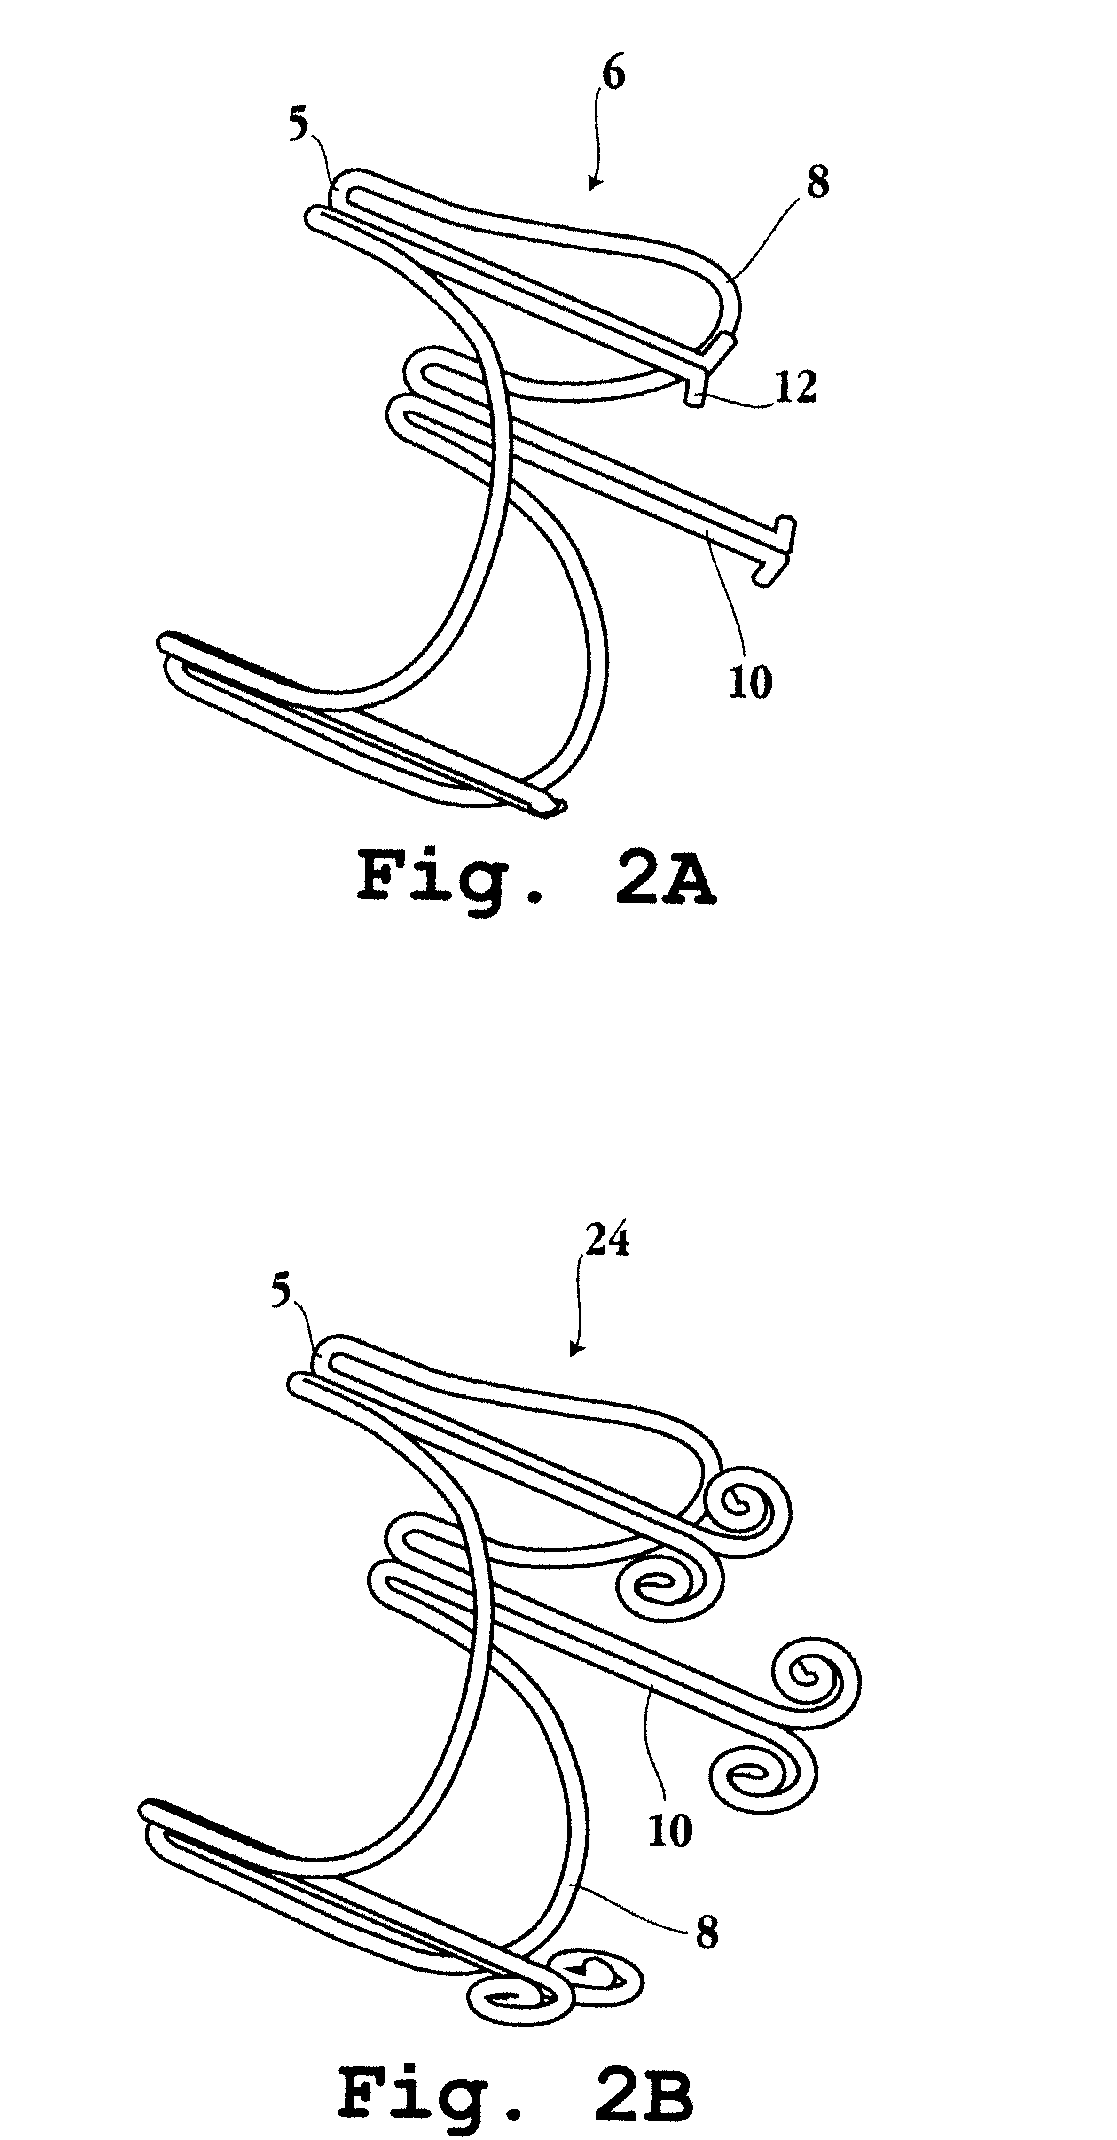 Valve prosthesis with movably attached claspers with apex